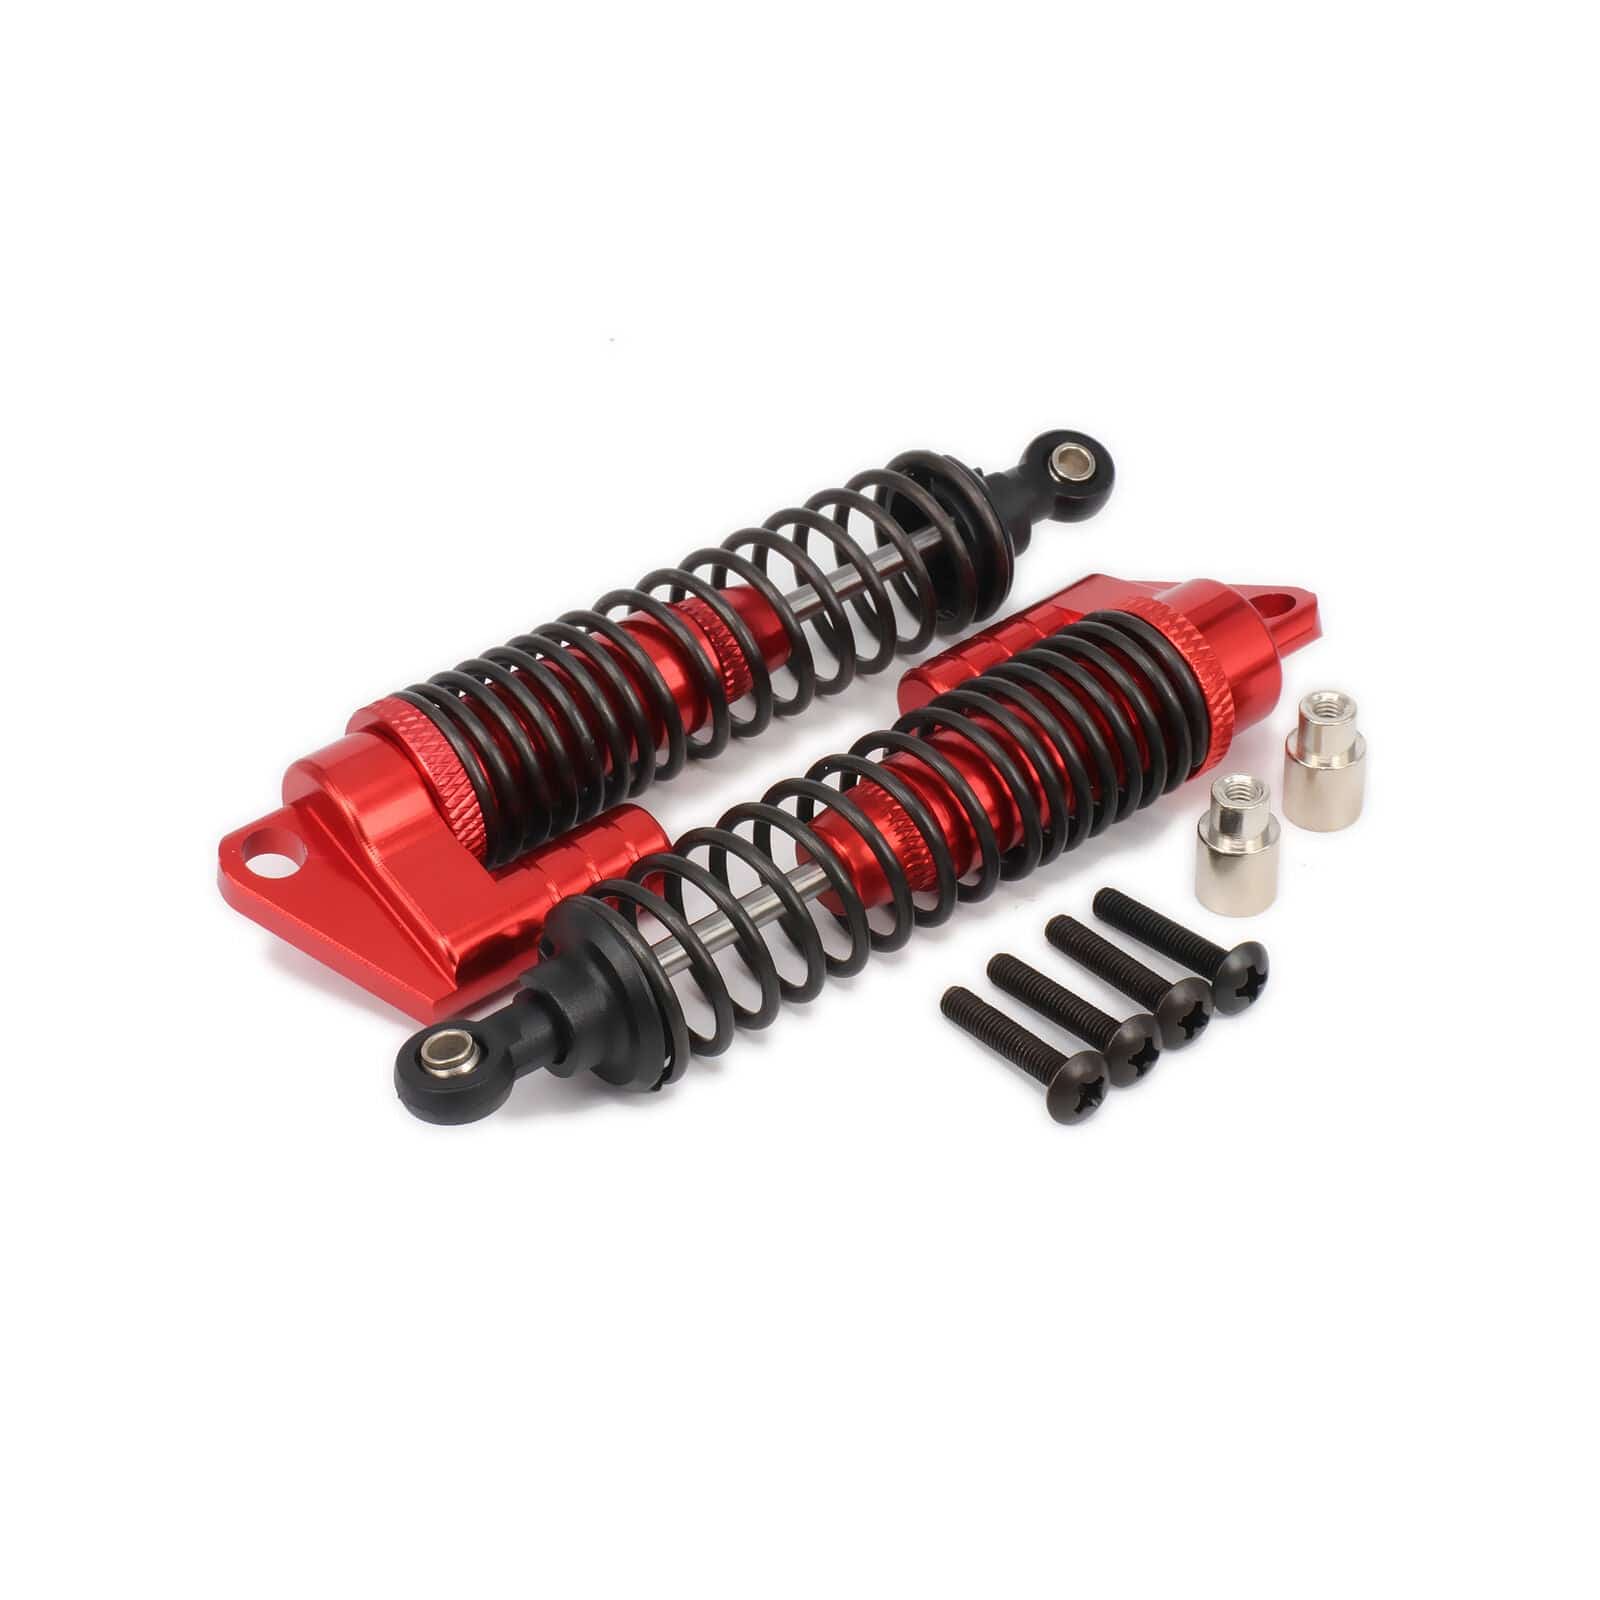 RCAWD UNIVERSAL RC UPGRADE PARTS Red RCAWD Universal 100mm Alloy Shock Absorber Damper  S106004 for RC Car 1/10 Buggy Truck Crawler